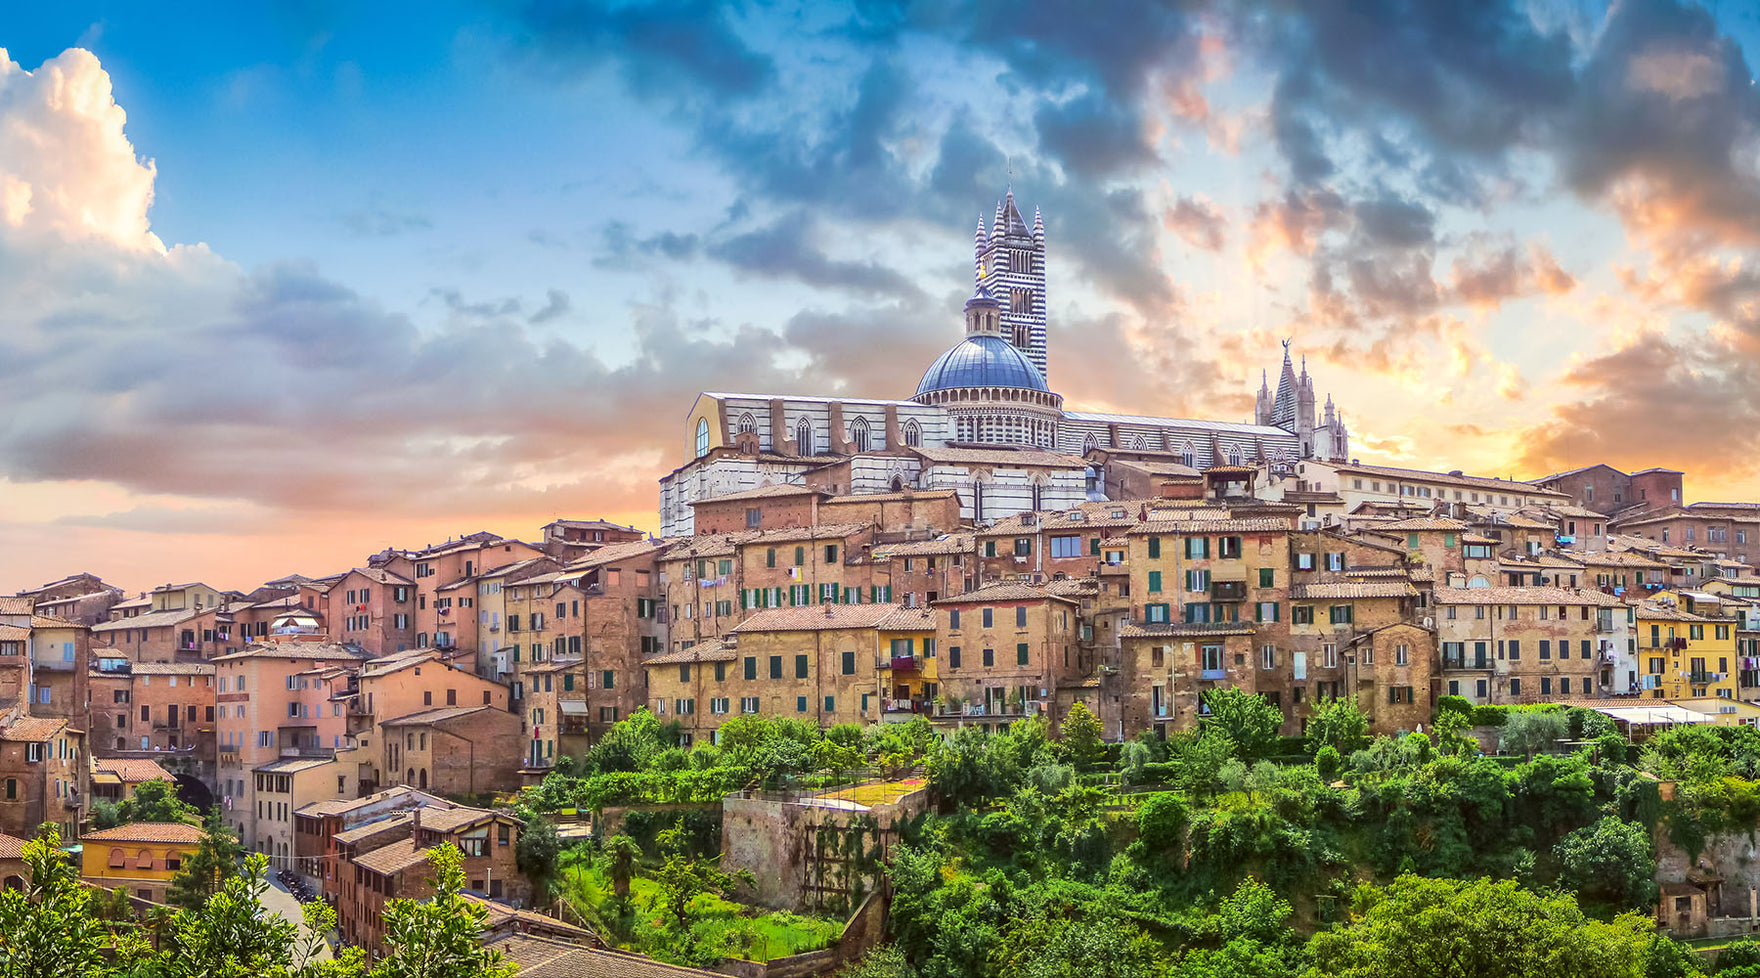 Beautiful view on Siena home to artisan manufacture of high quality apple watch bands